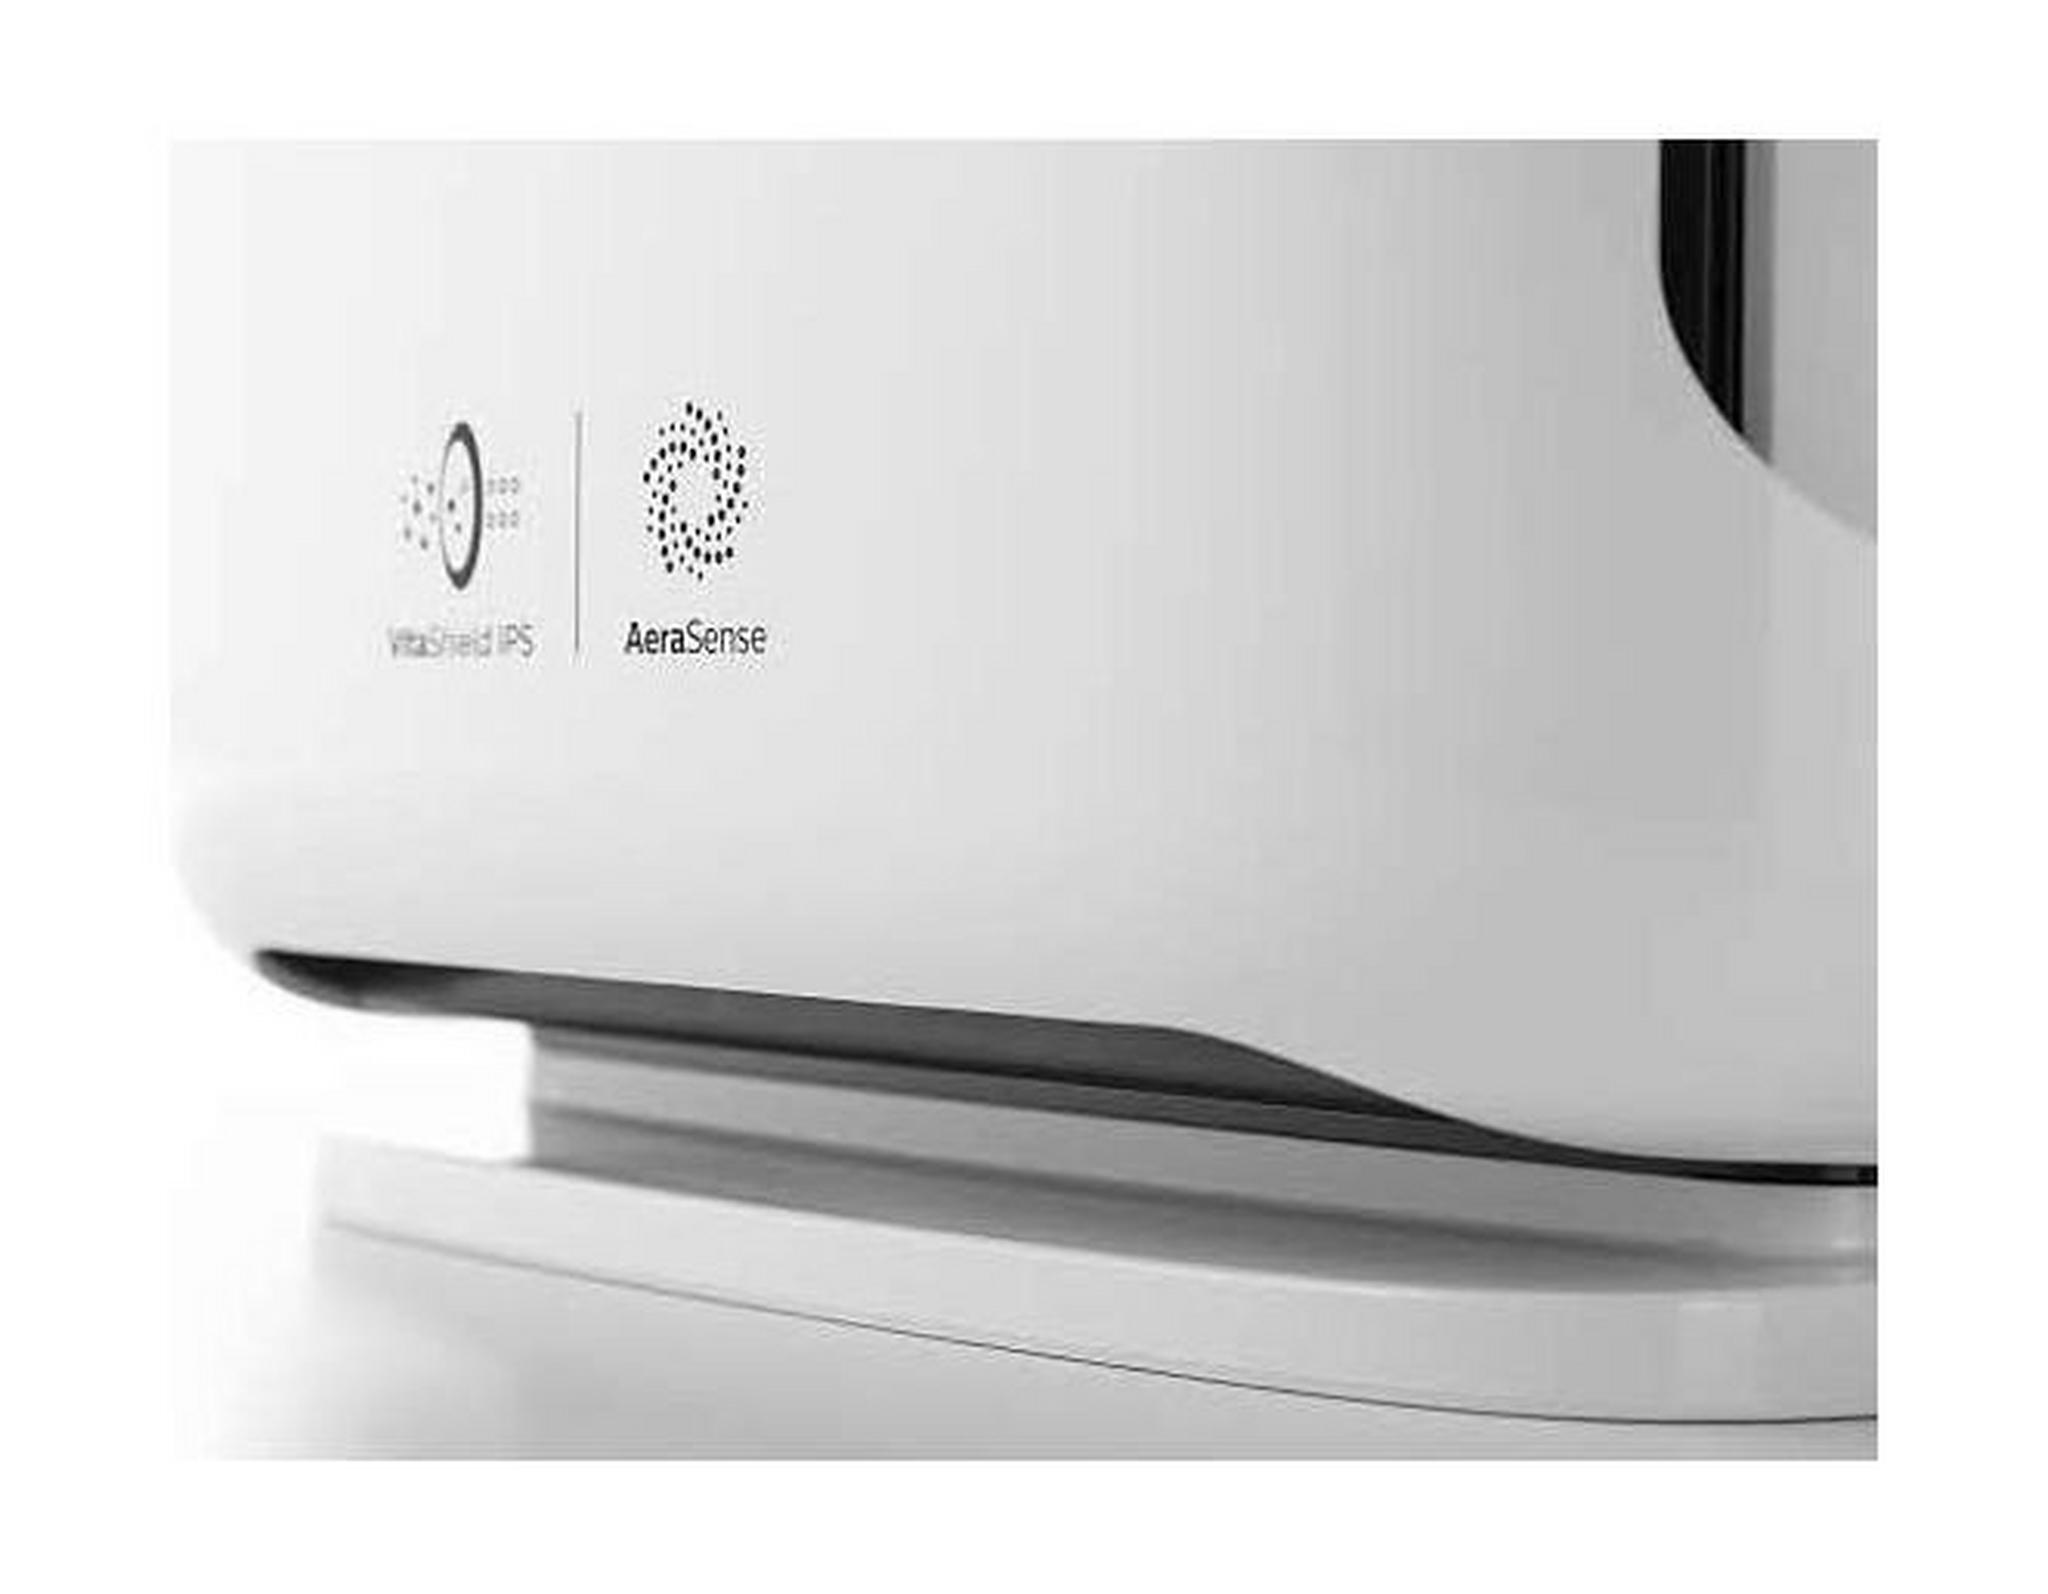 Philips Comfort Air Cleaner Purifier (AC2887/30) – White